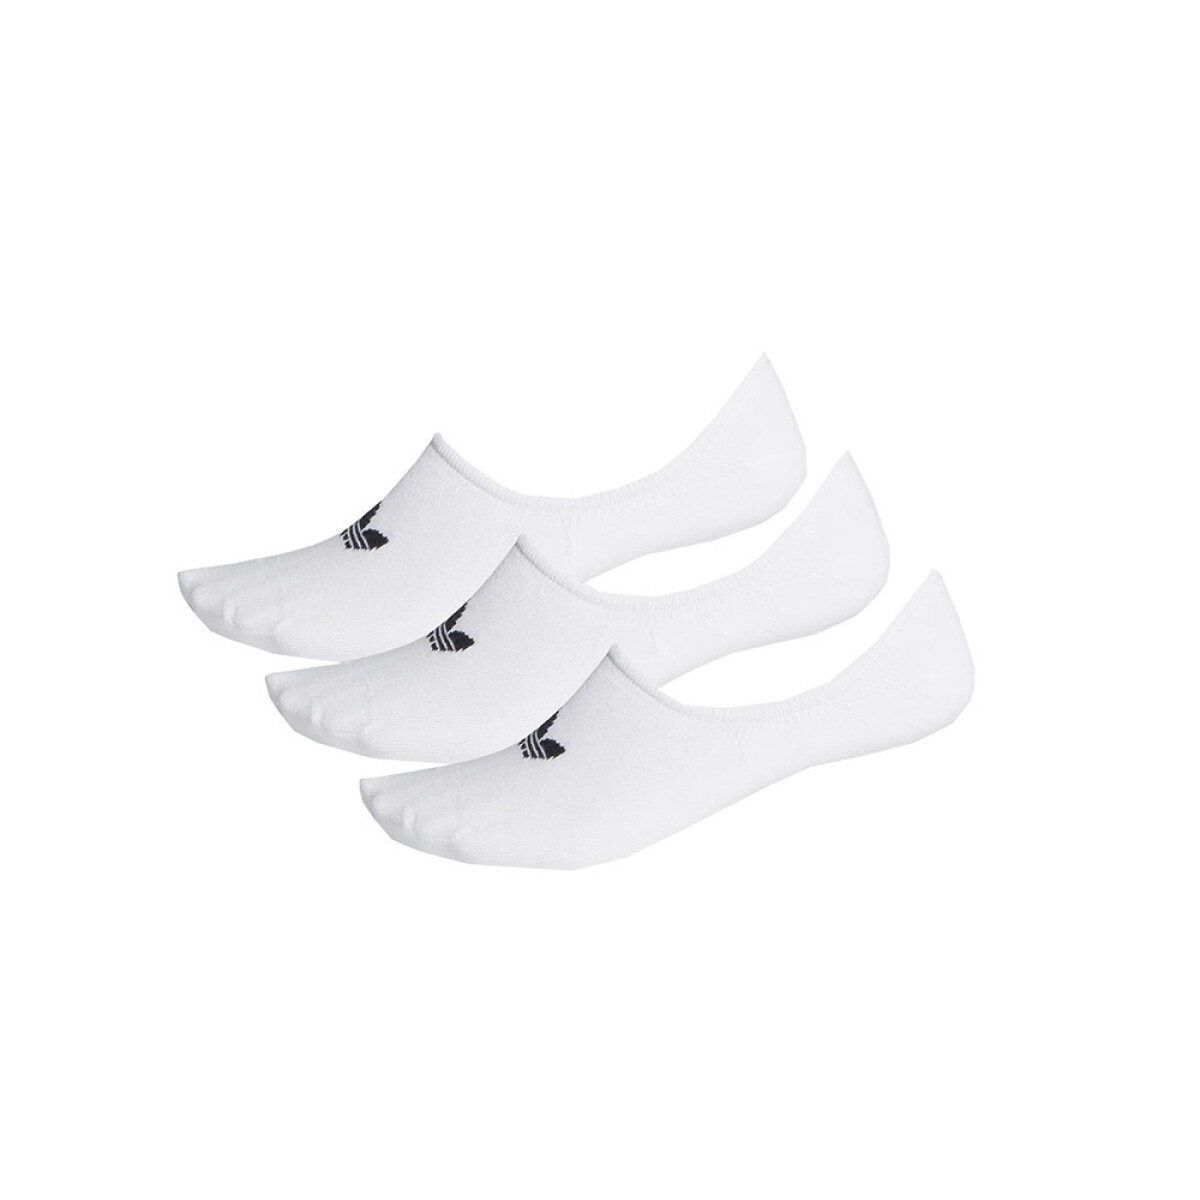 3 PACK adidas LOW CUT SOCK - WHITE 